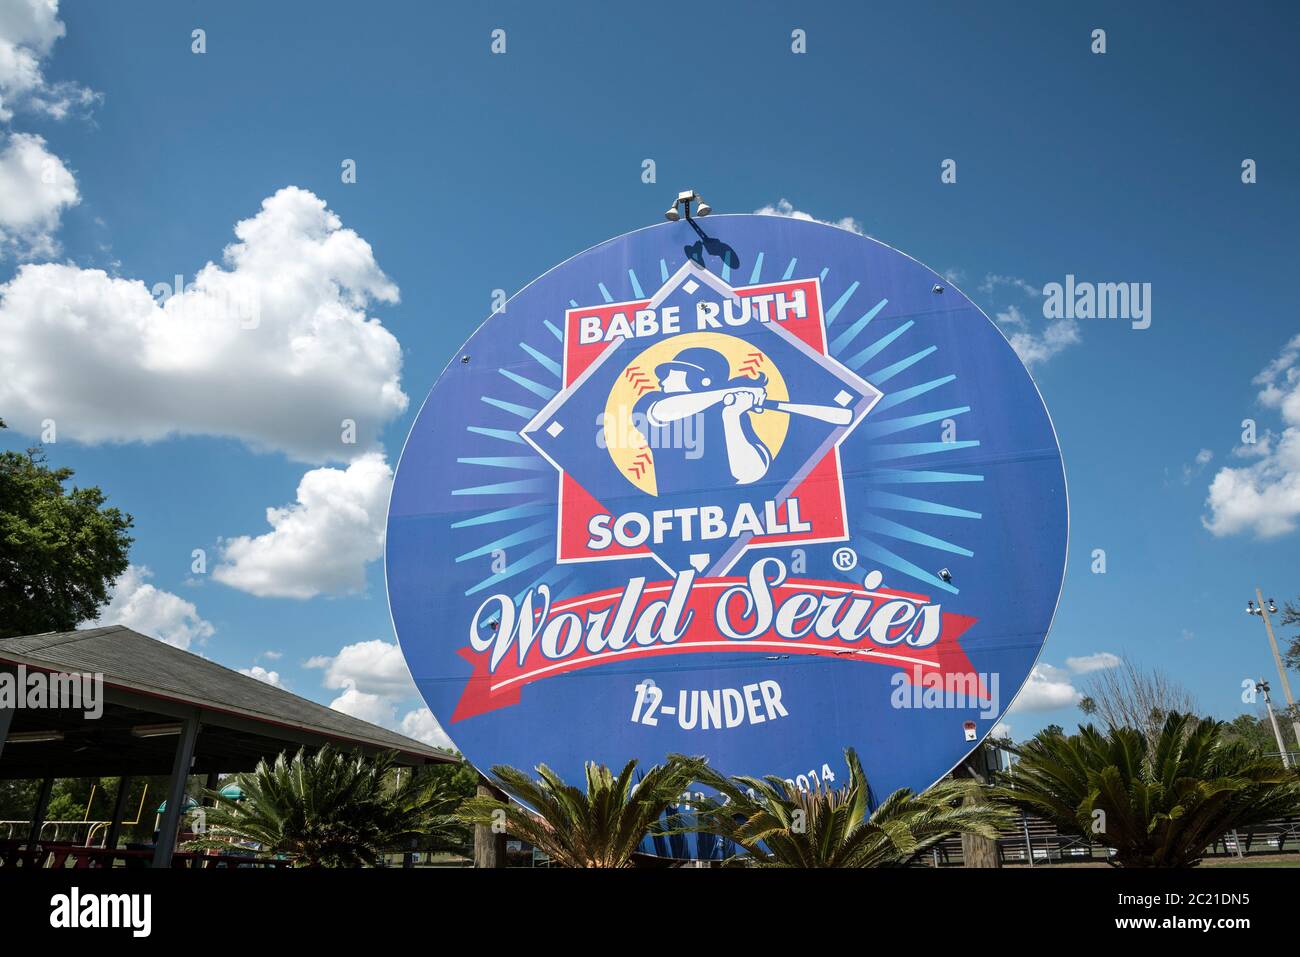 Babe Ruth Softball World Series was held for several years at the Alachua County Hal Brady Sports Complex, in Alachua, Florida. Stock Photo